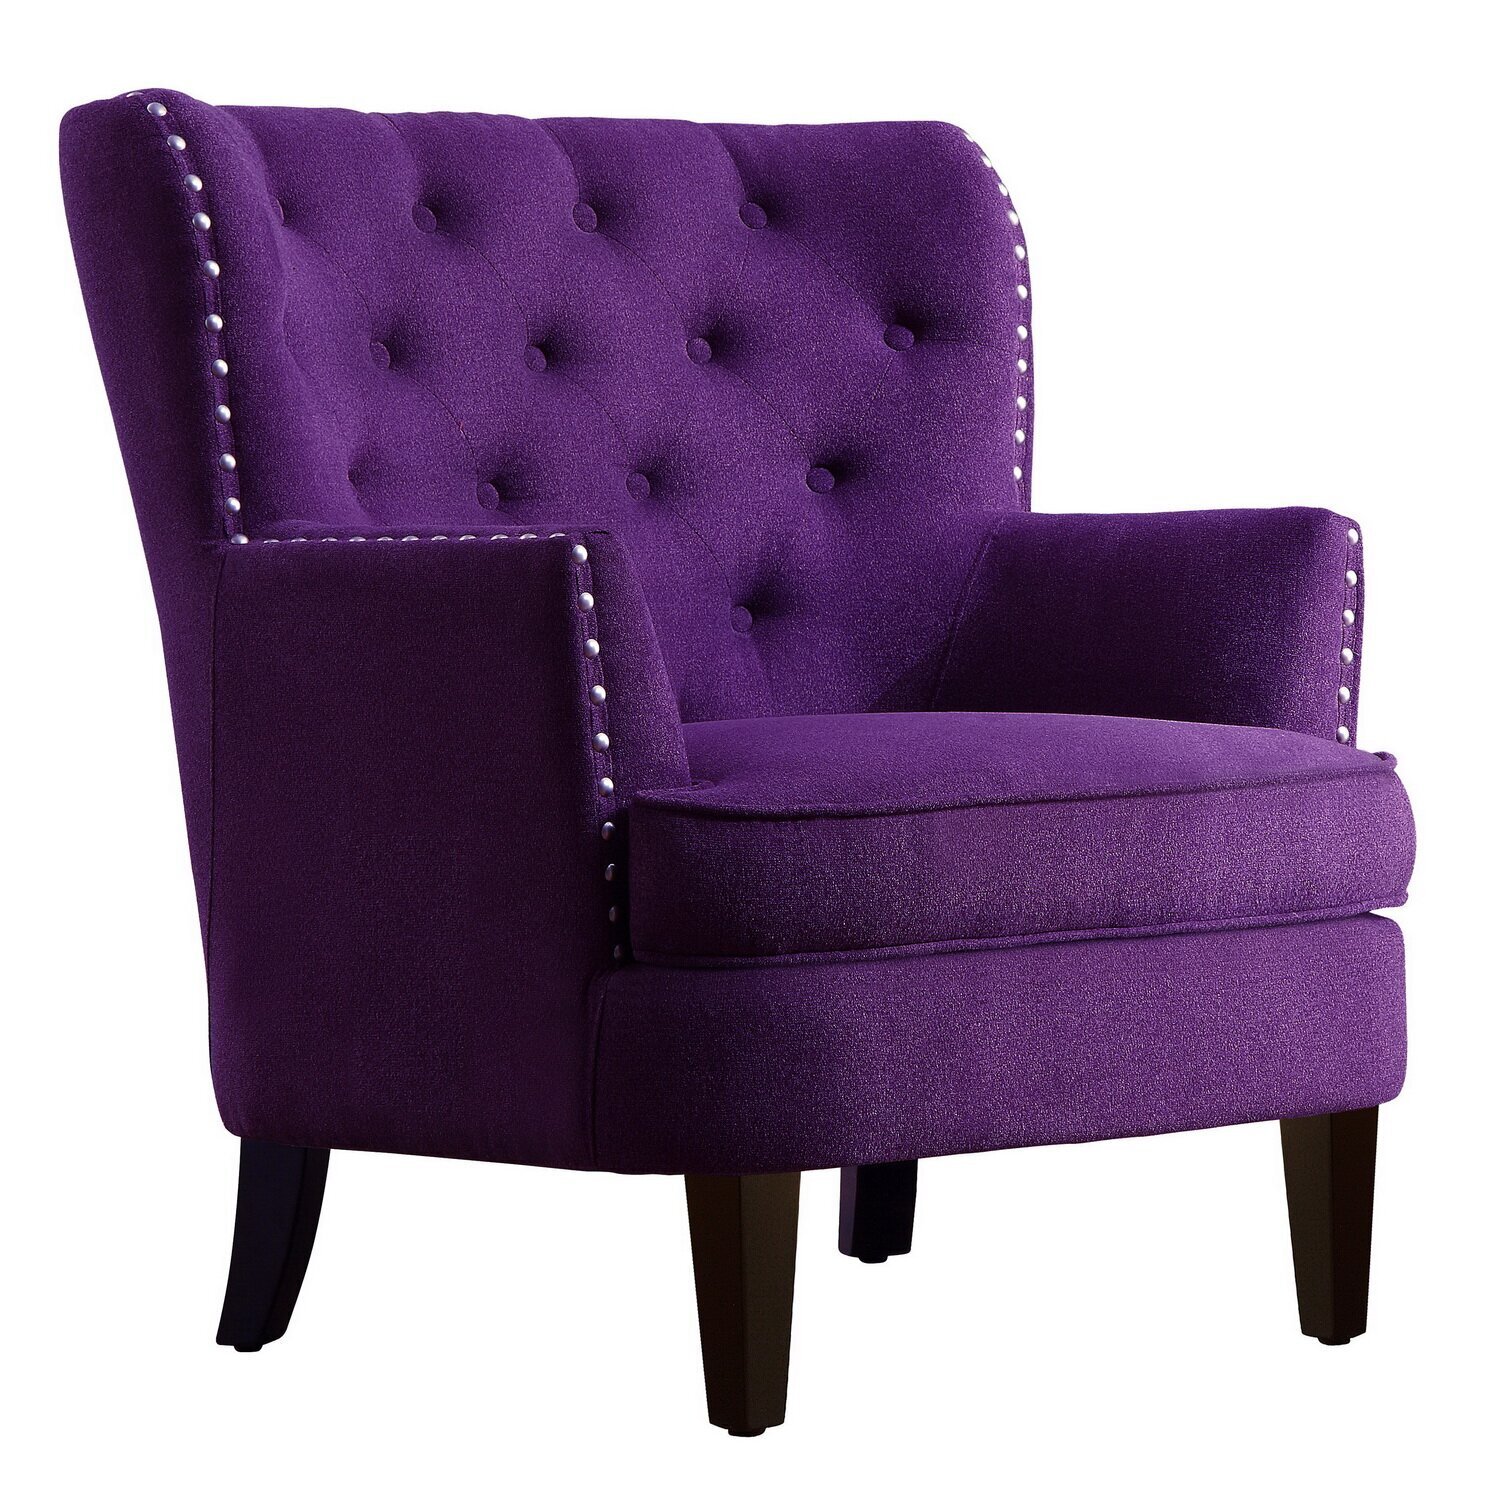 Dark and Soft Wingback Chair